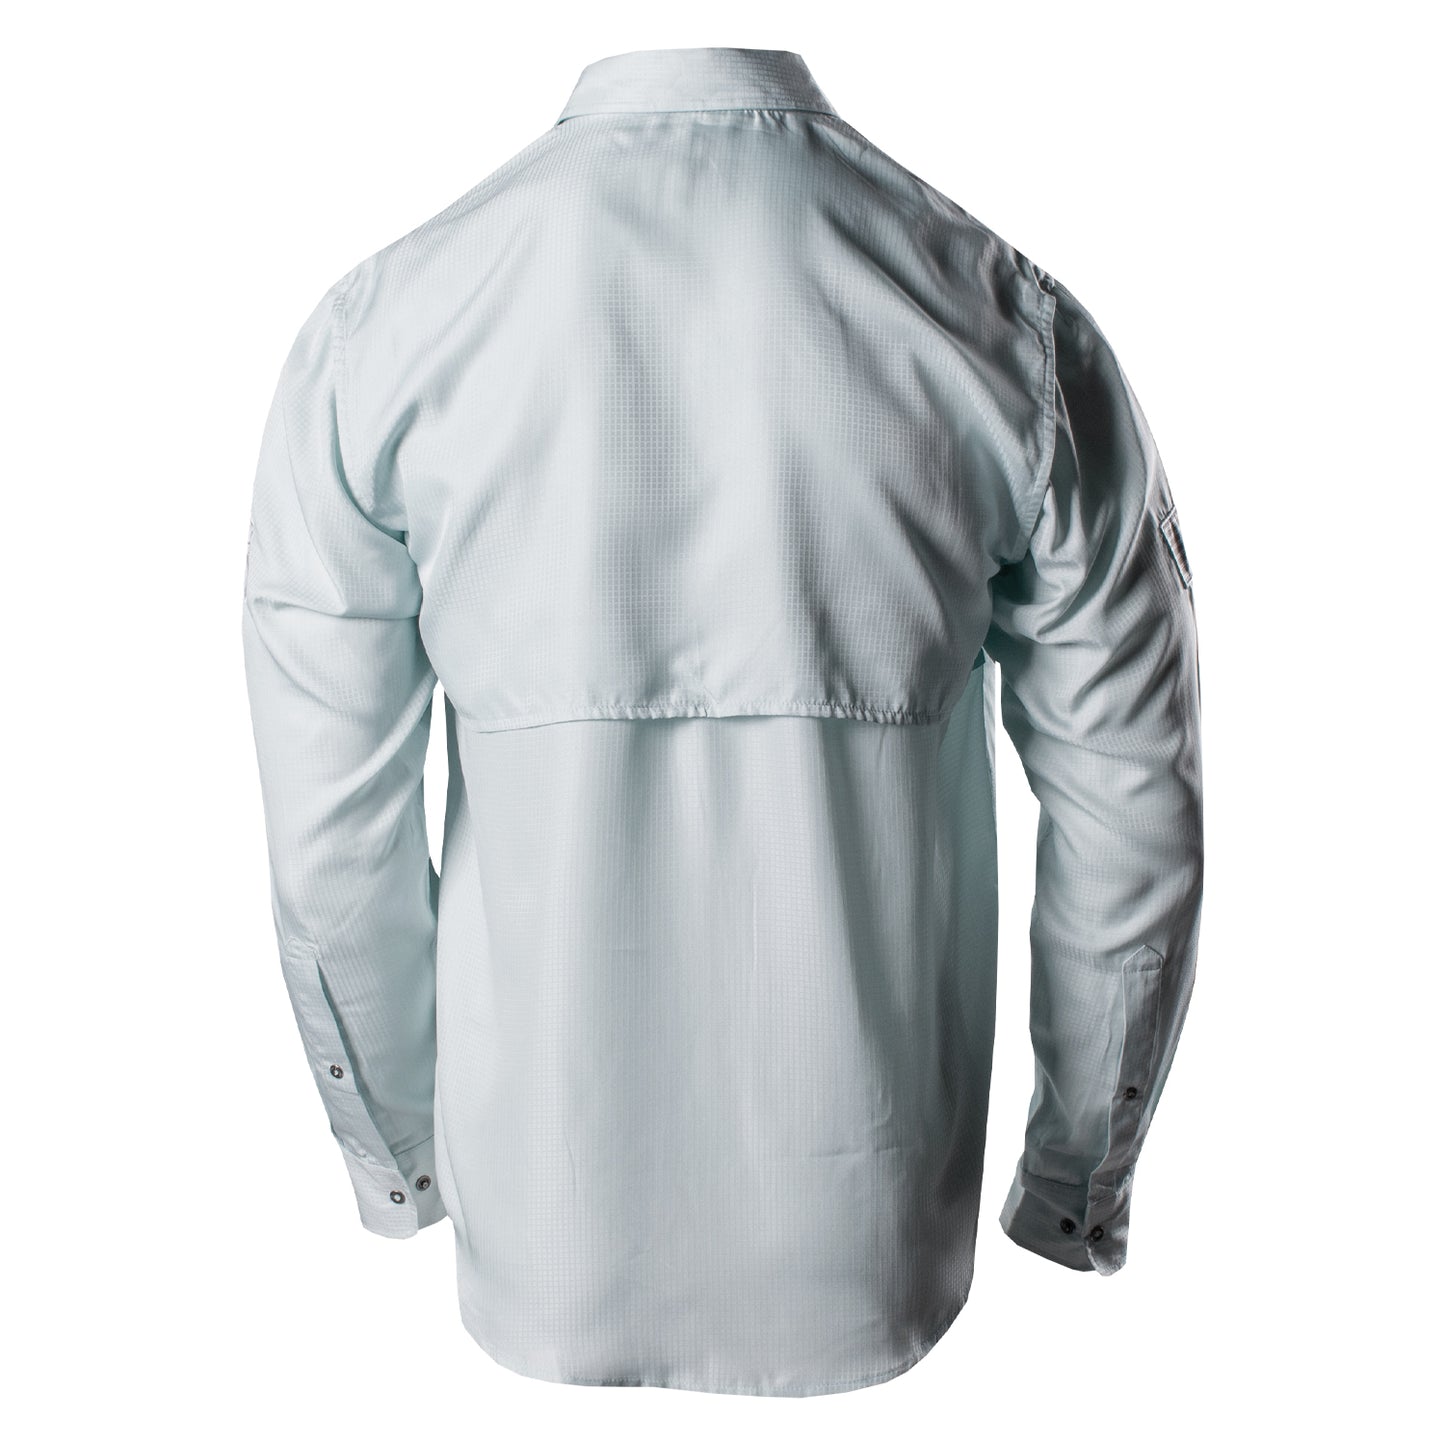 Back of the Grunt Style Long Sleeve Fishing Shirt in Seafoam featuring the vented back panel